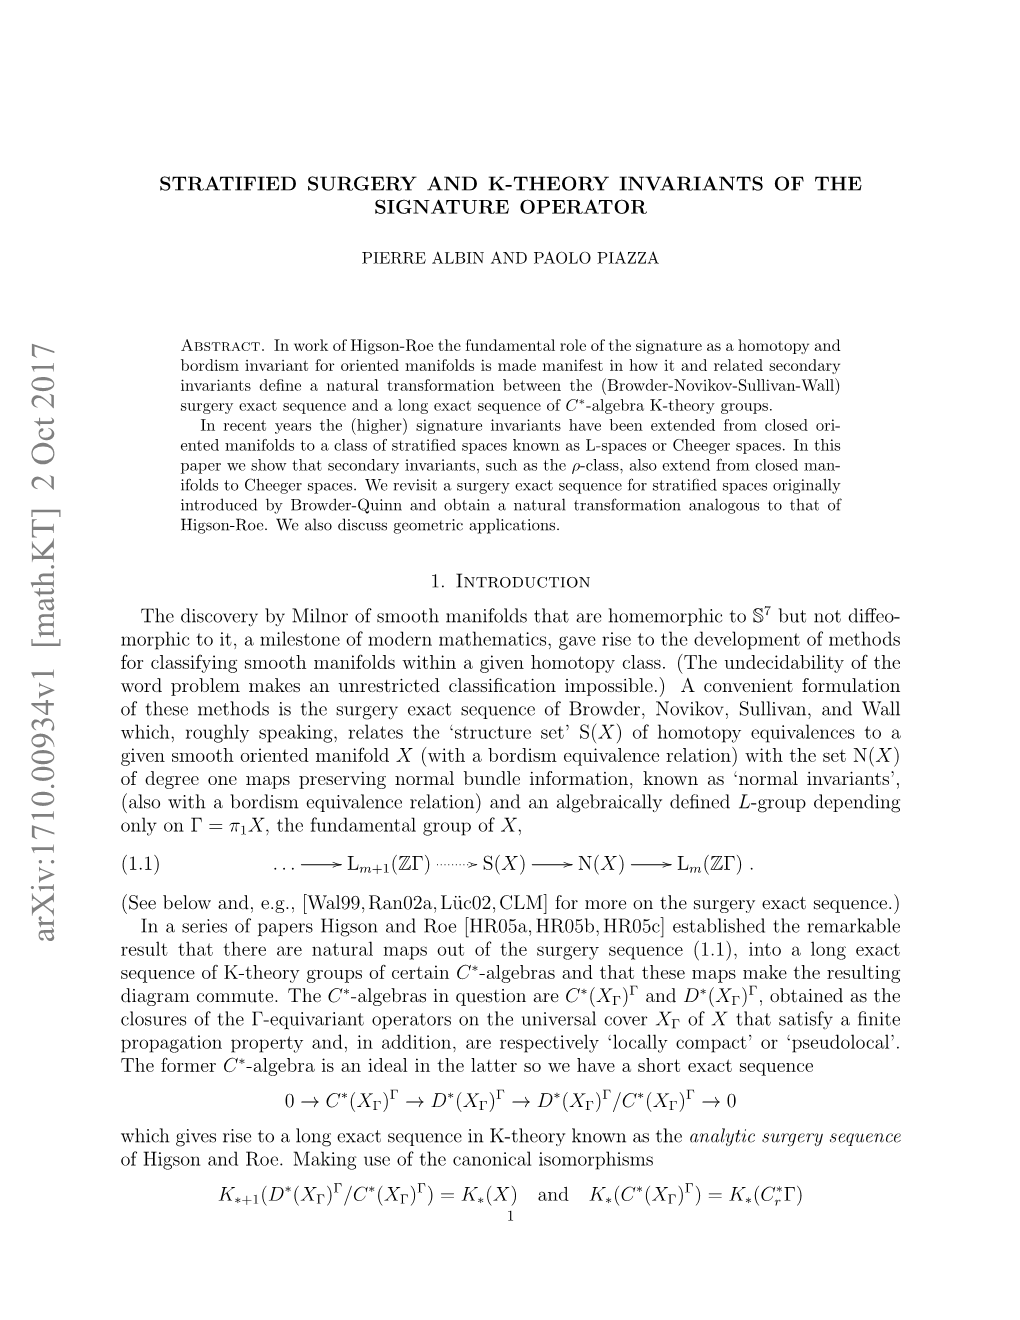 Stratified Surgery and K-Theory Invariants of the Signature Operator